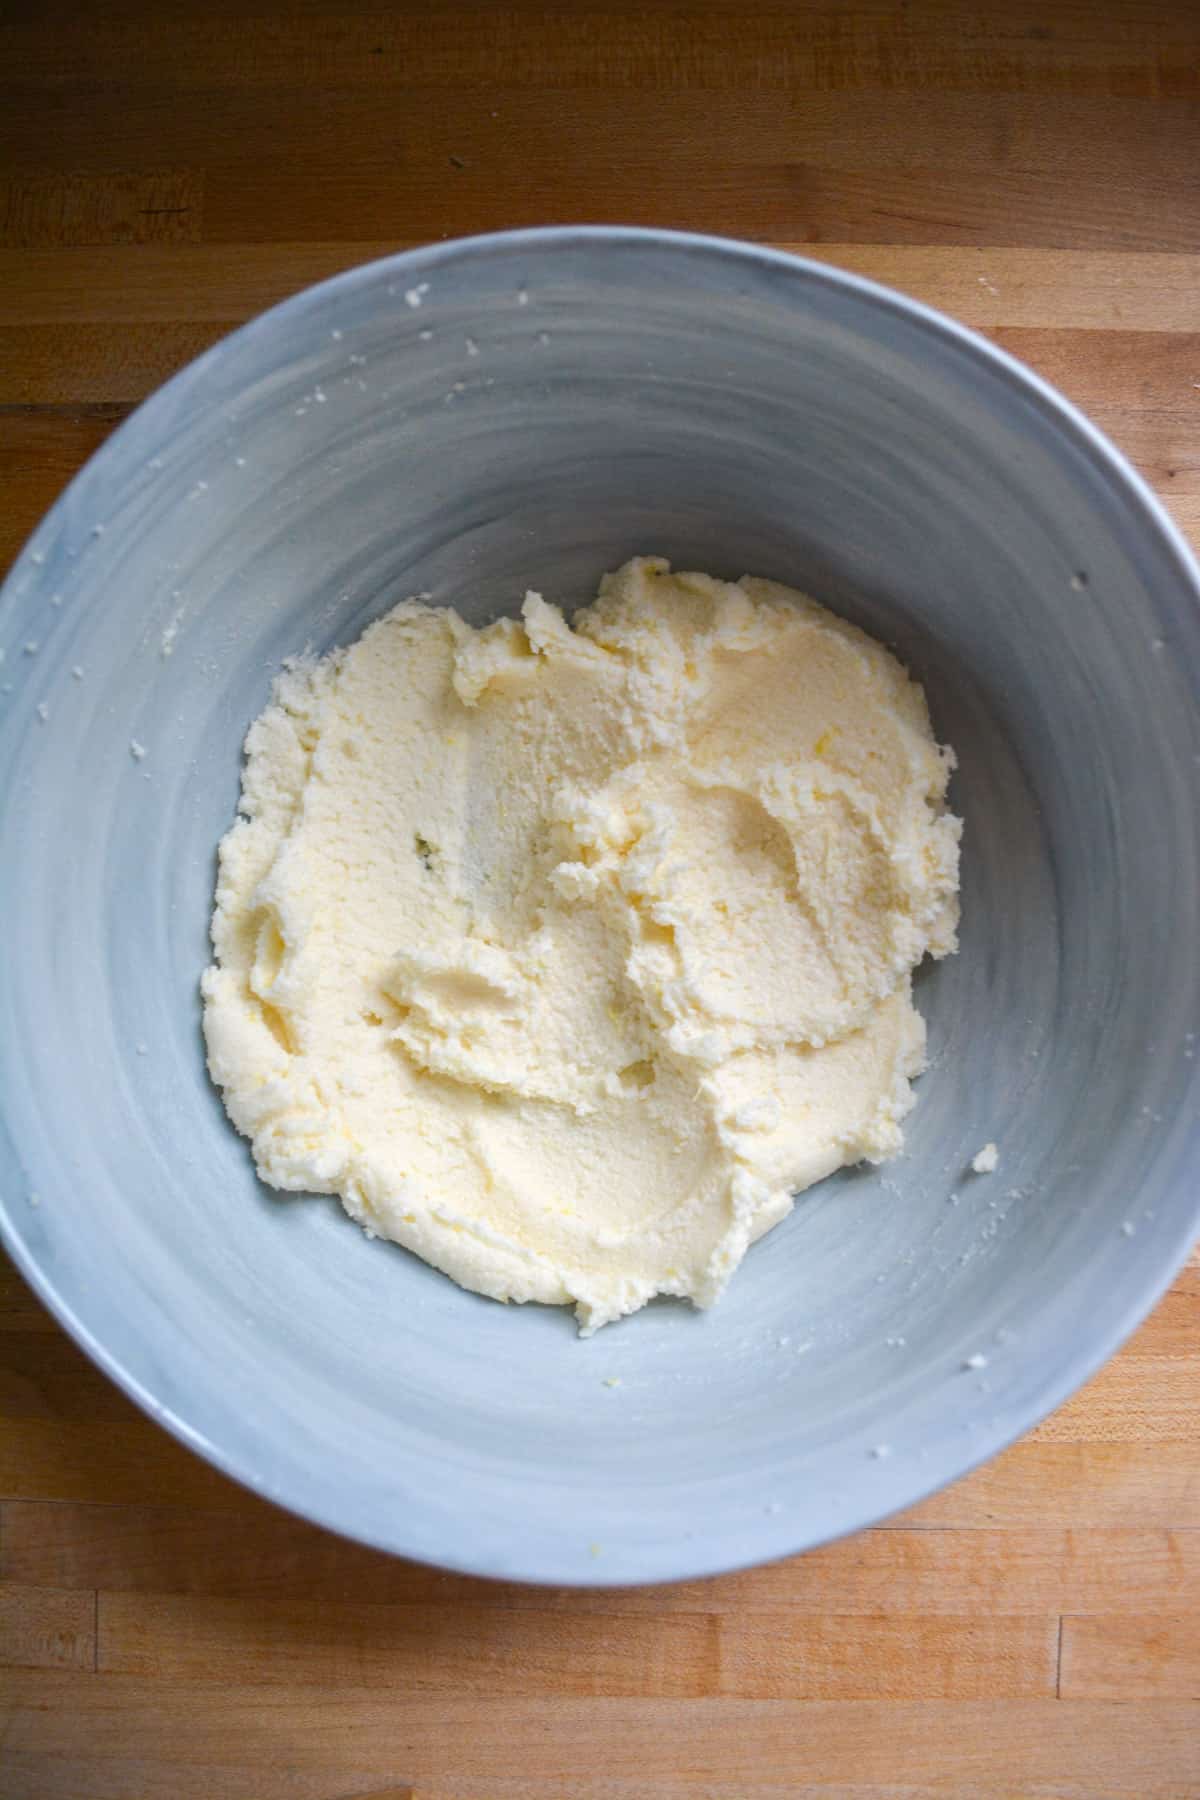 Creamed vegan butter and sugar in a mixing bowl.